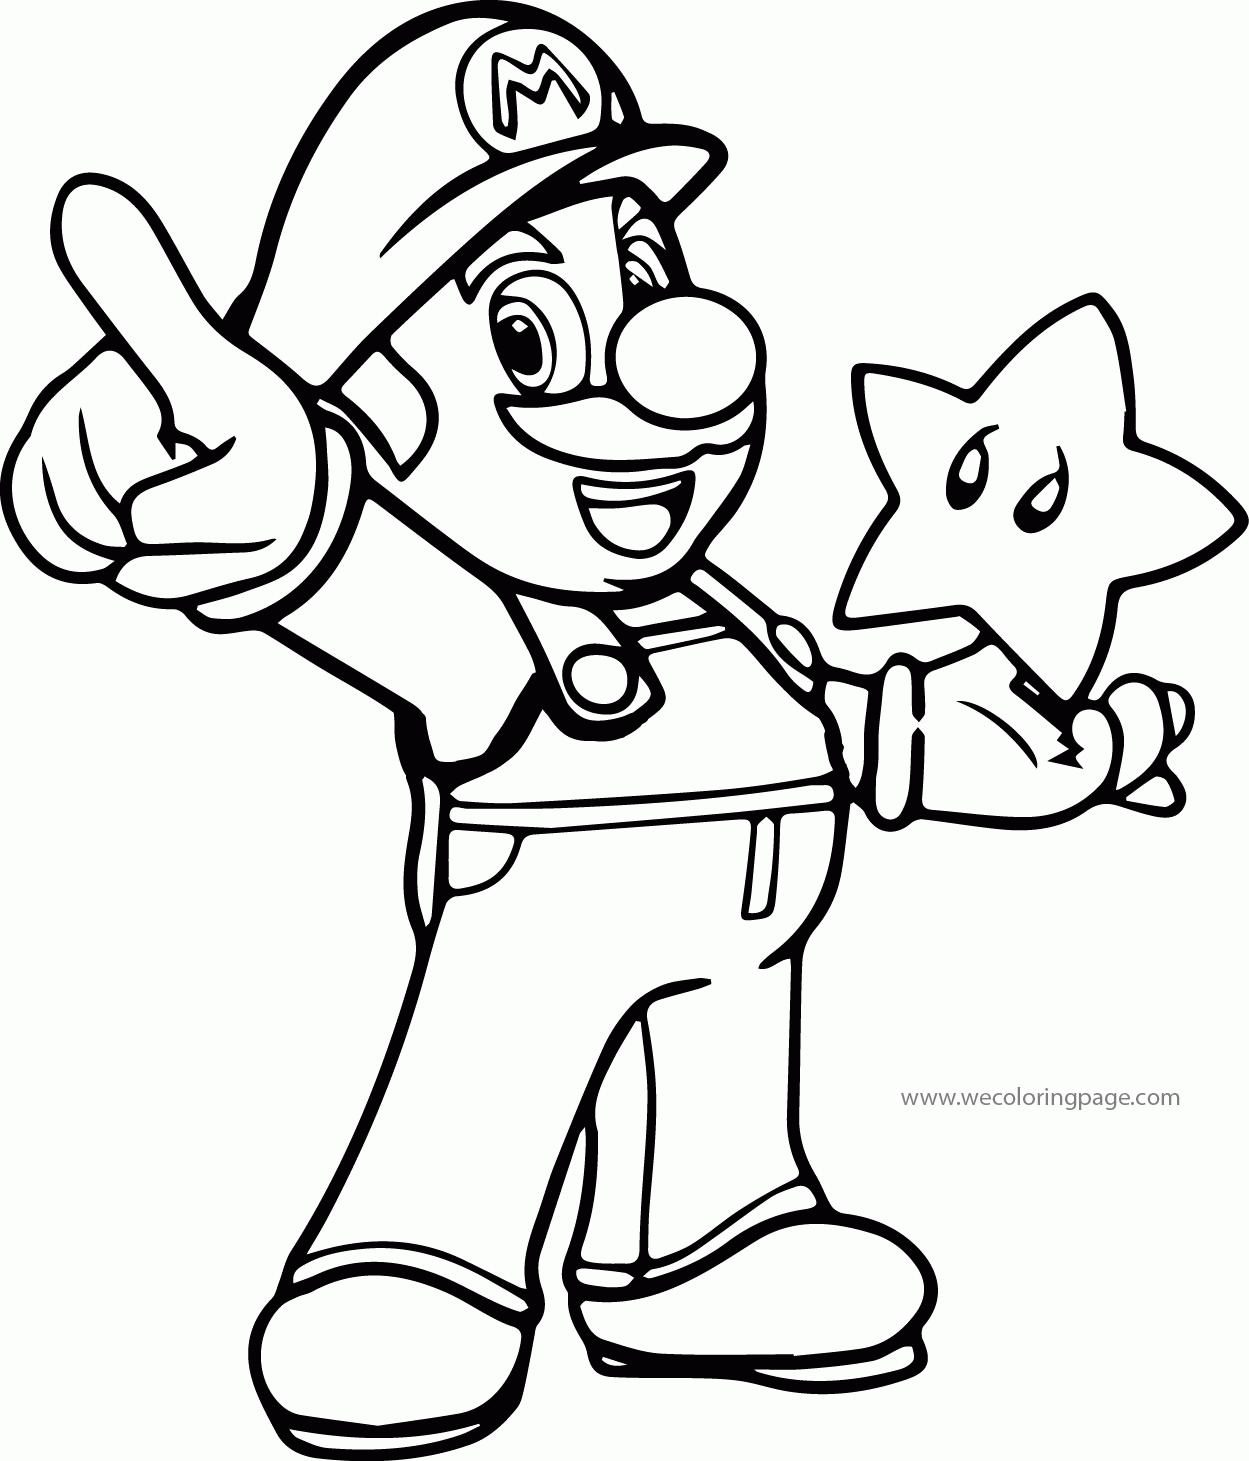 Mario Fighting Bowser Coloring Pages Mario Coloring Pages Free ...